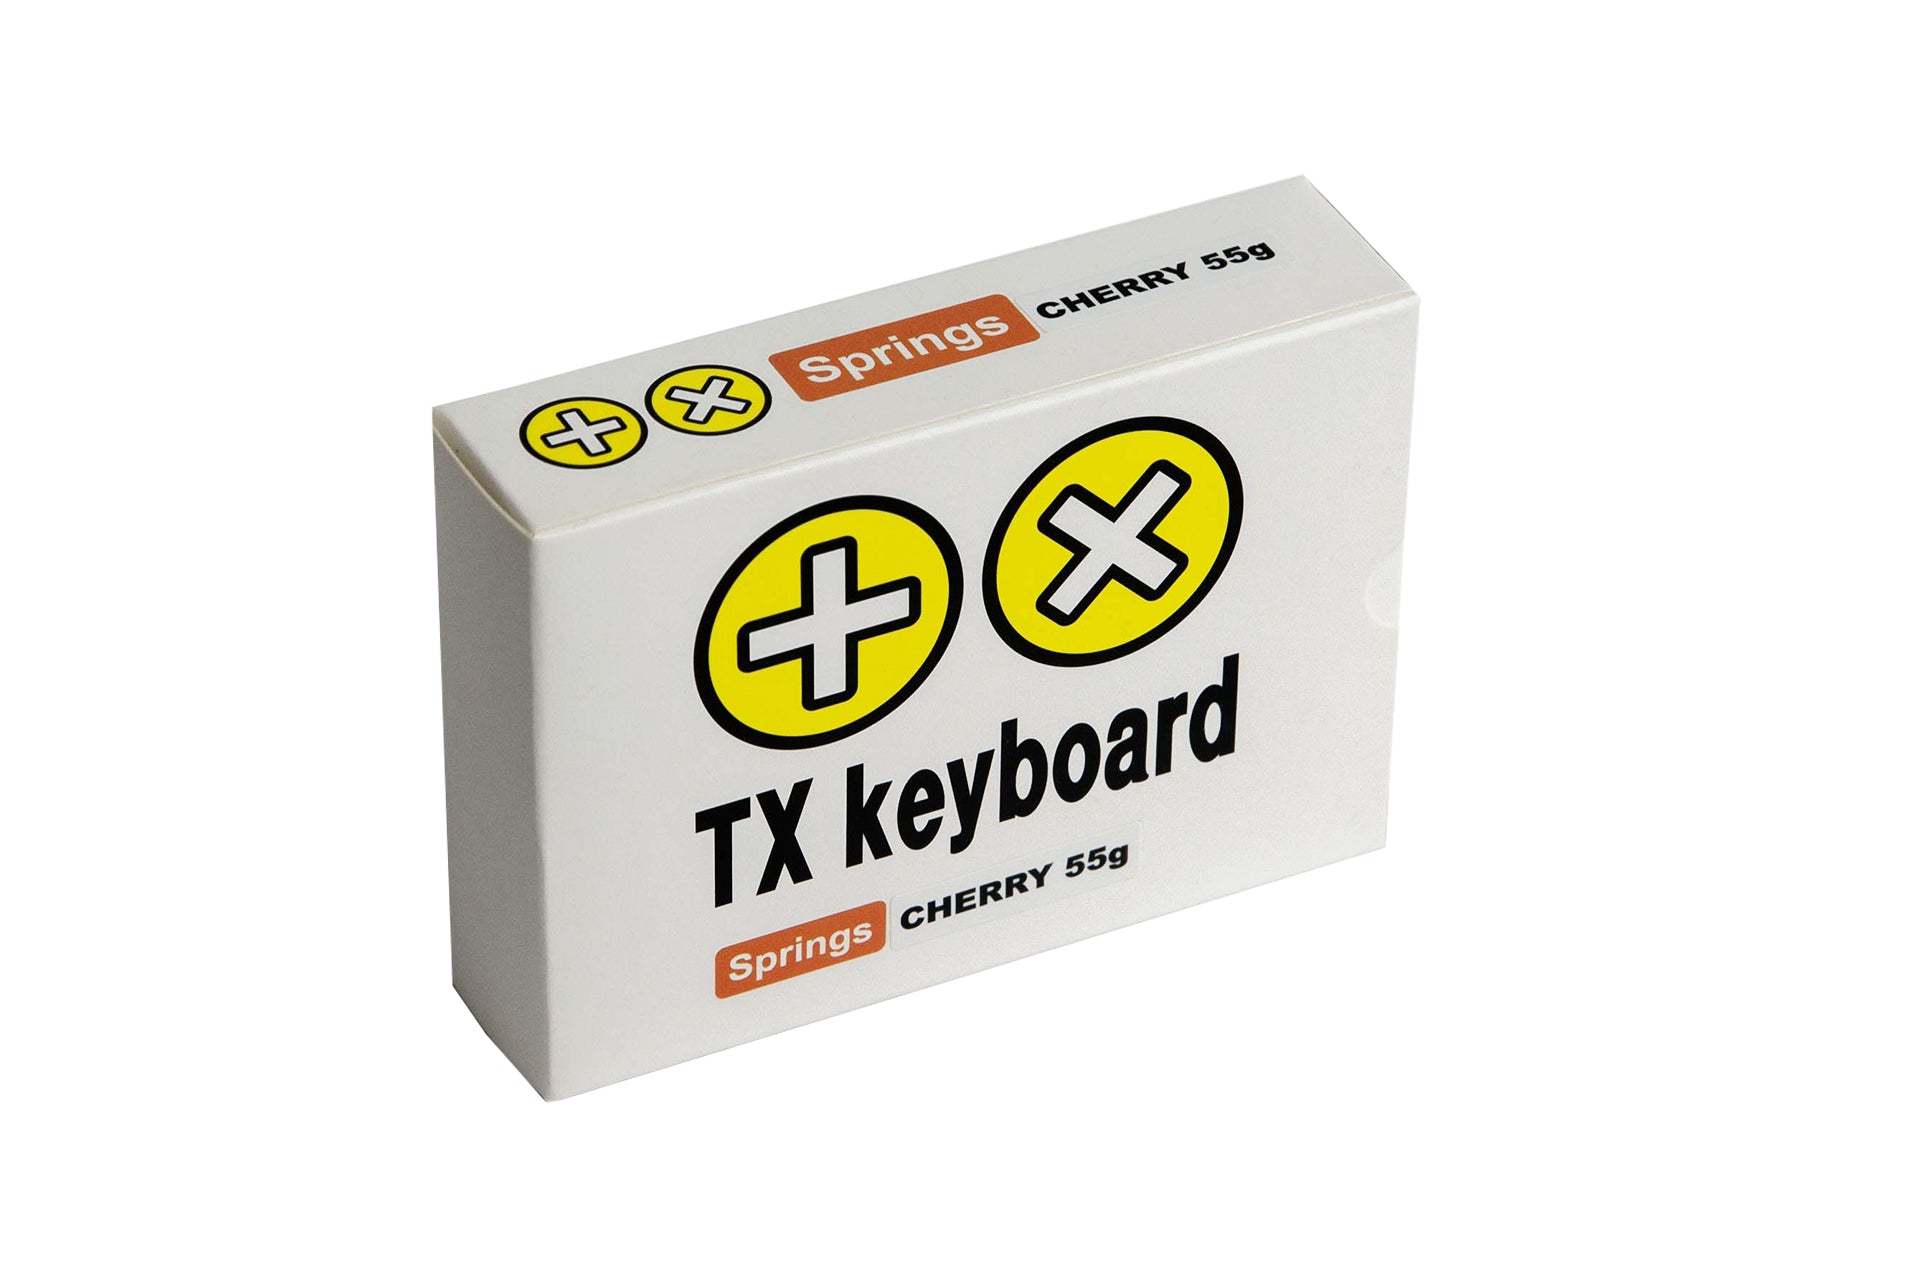 TX Spring Lube Deck featuring a precision-designed deck, 2-3ml bottle of paraffin synthetic oil, protective covers, and a durable storage box, displayed on a neutral backdrop.